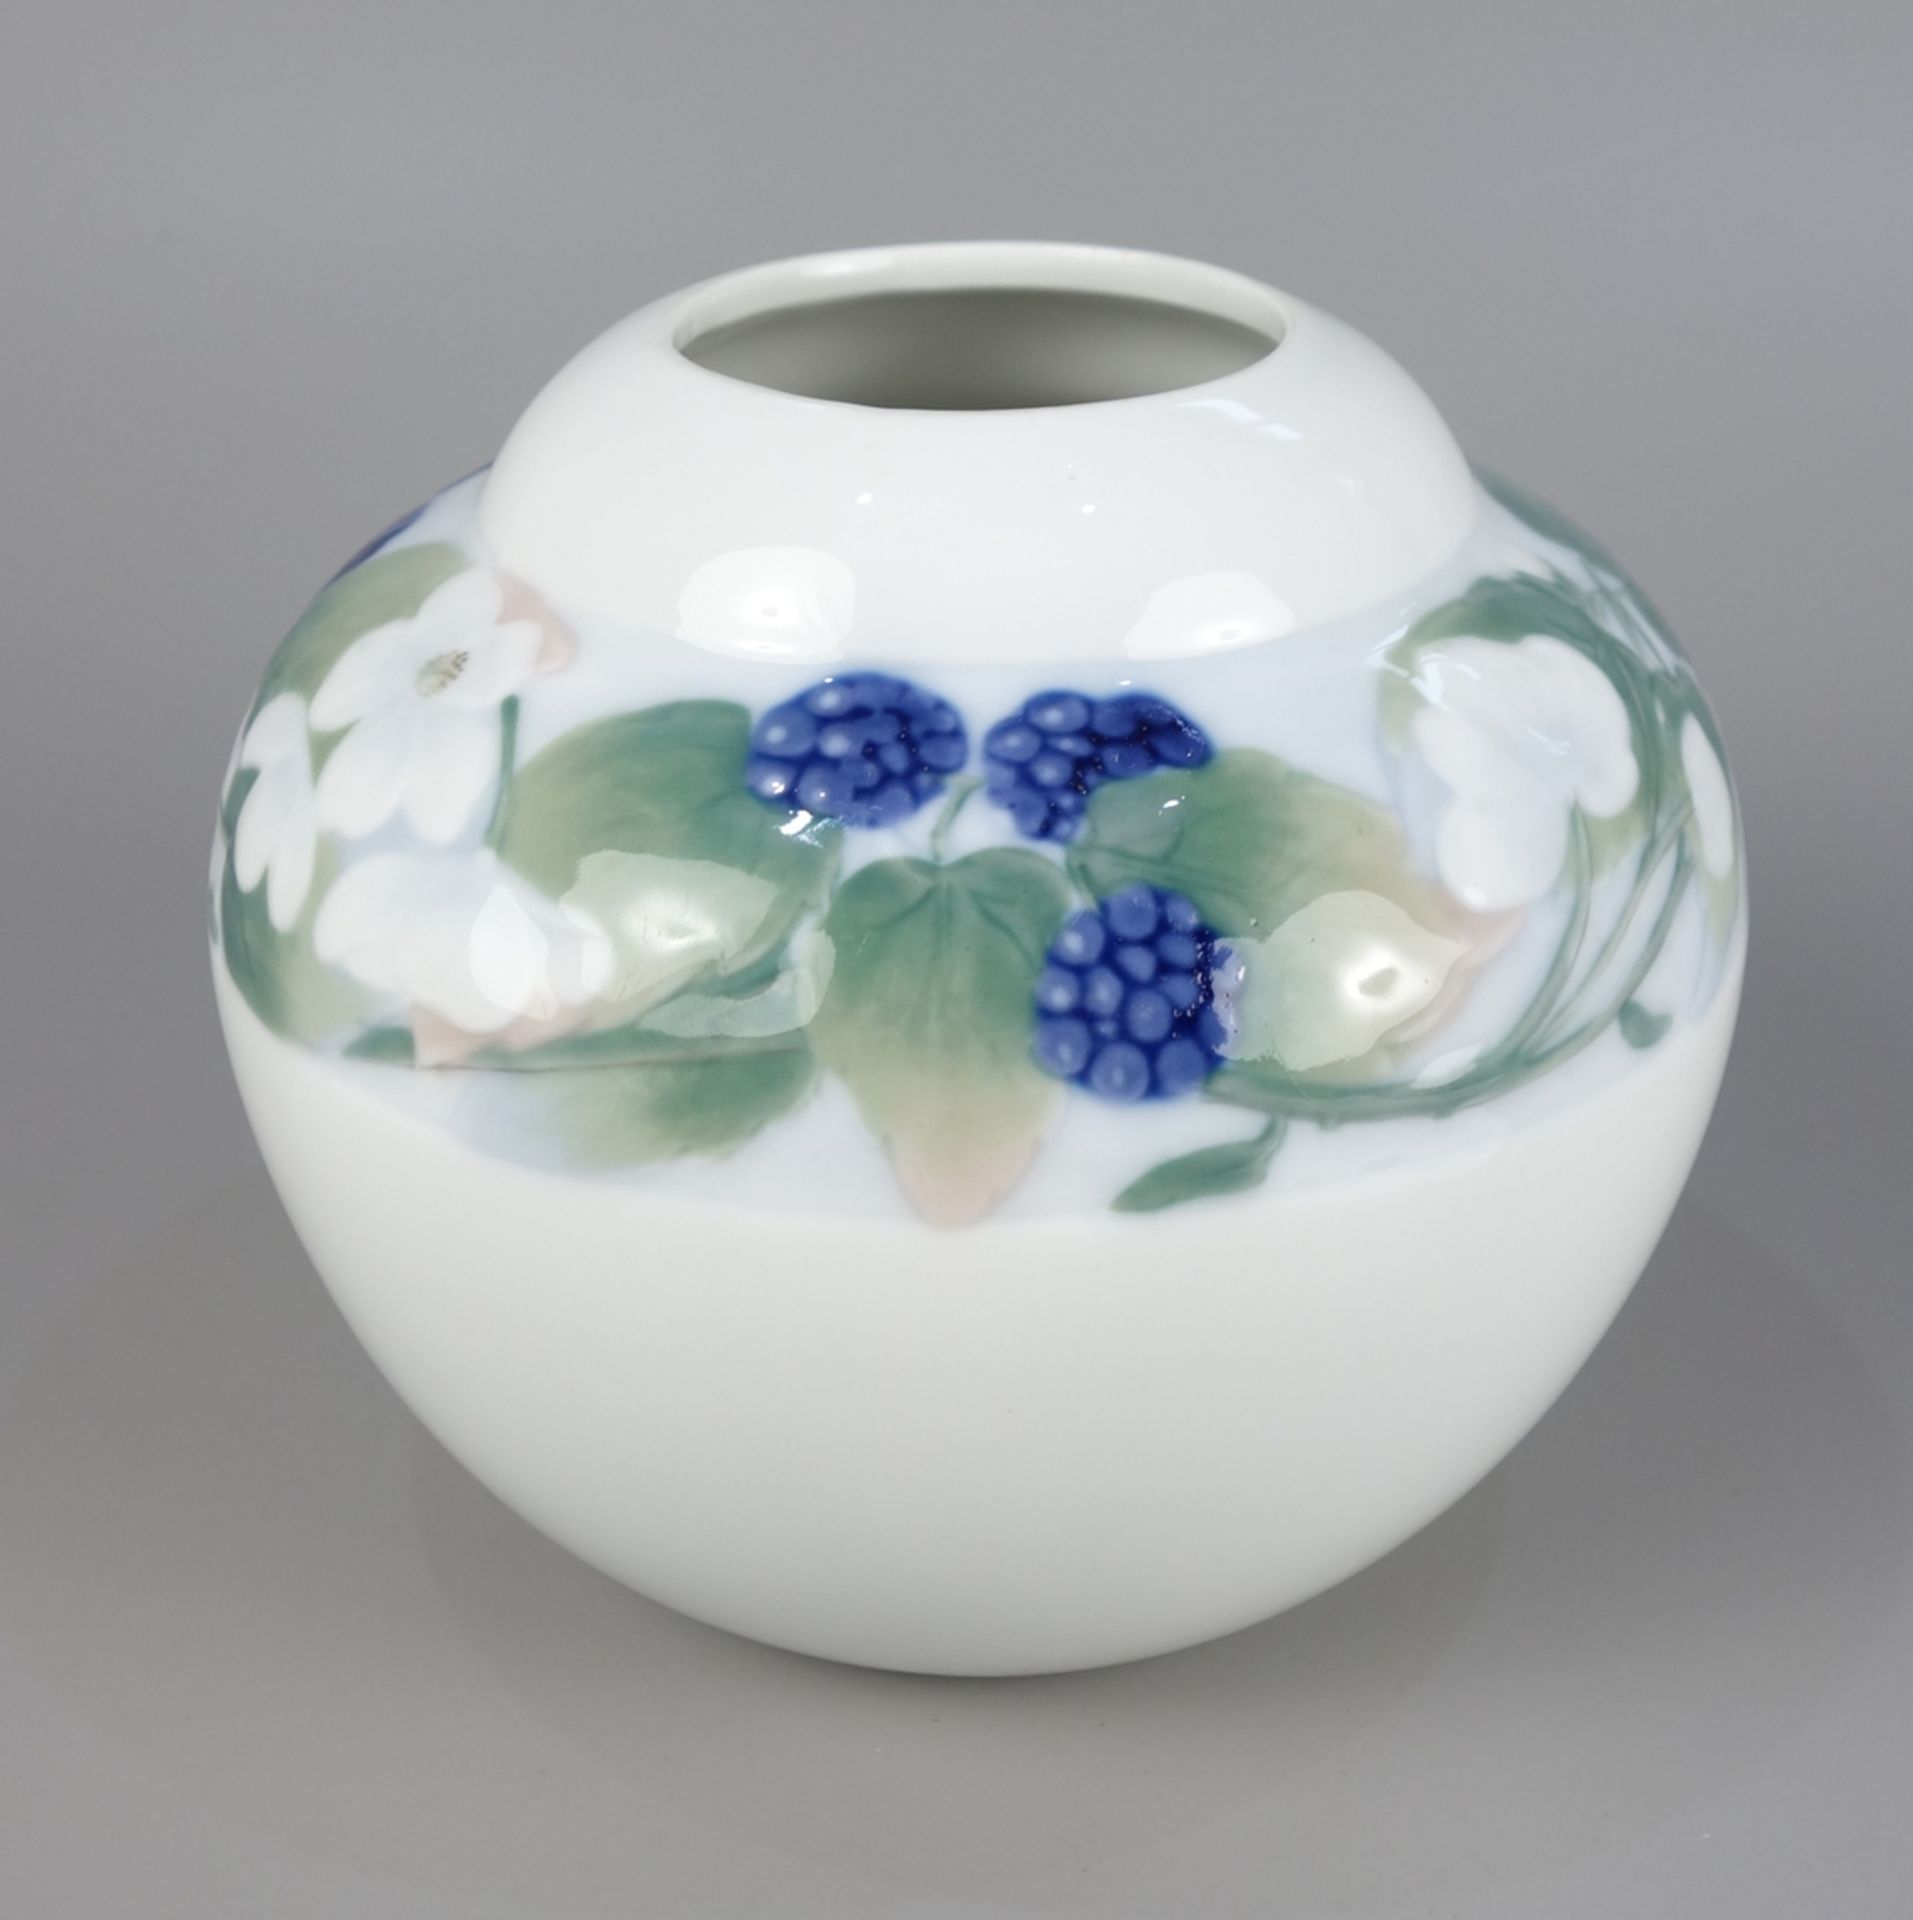 Vase with blackberry branches, Metzler&Ortloff, Art Nouveau, c.1900 - Image 2 of 4